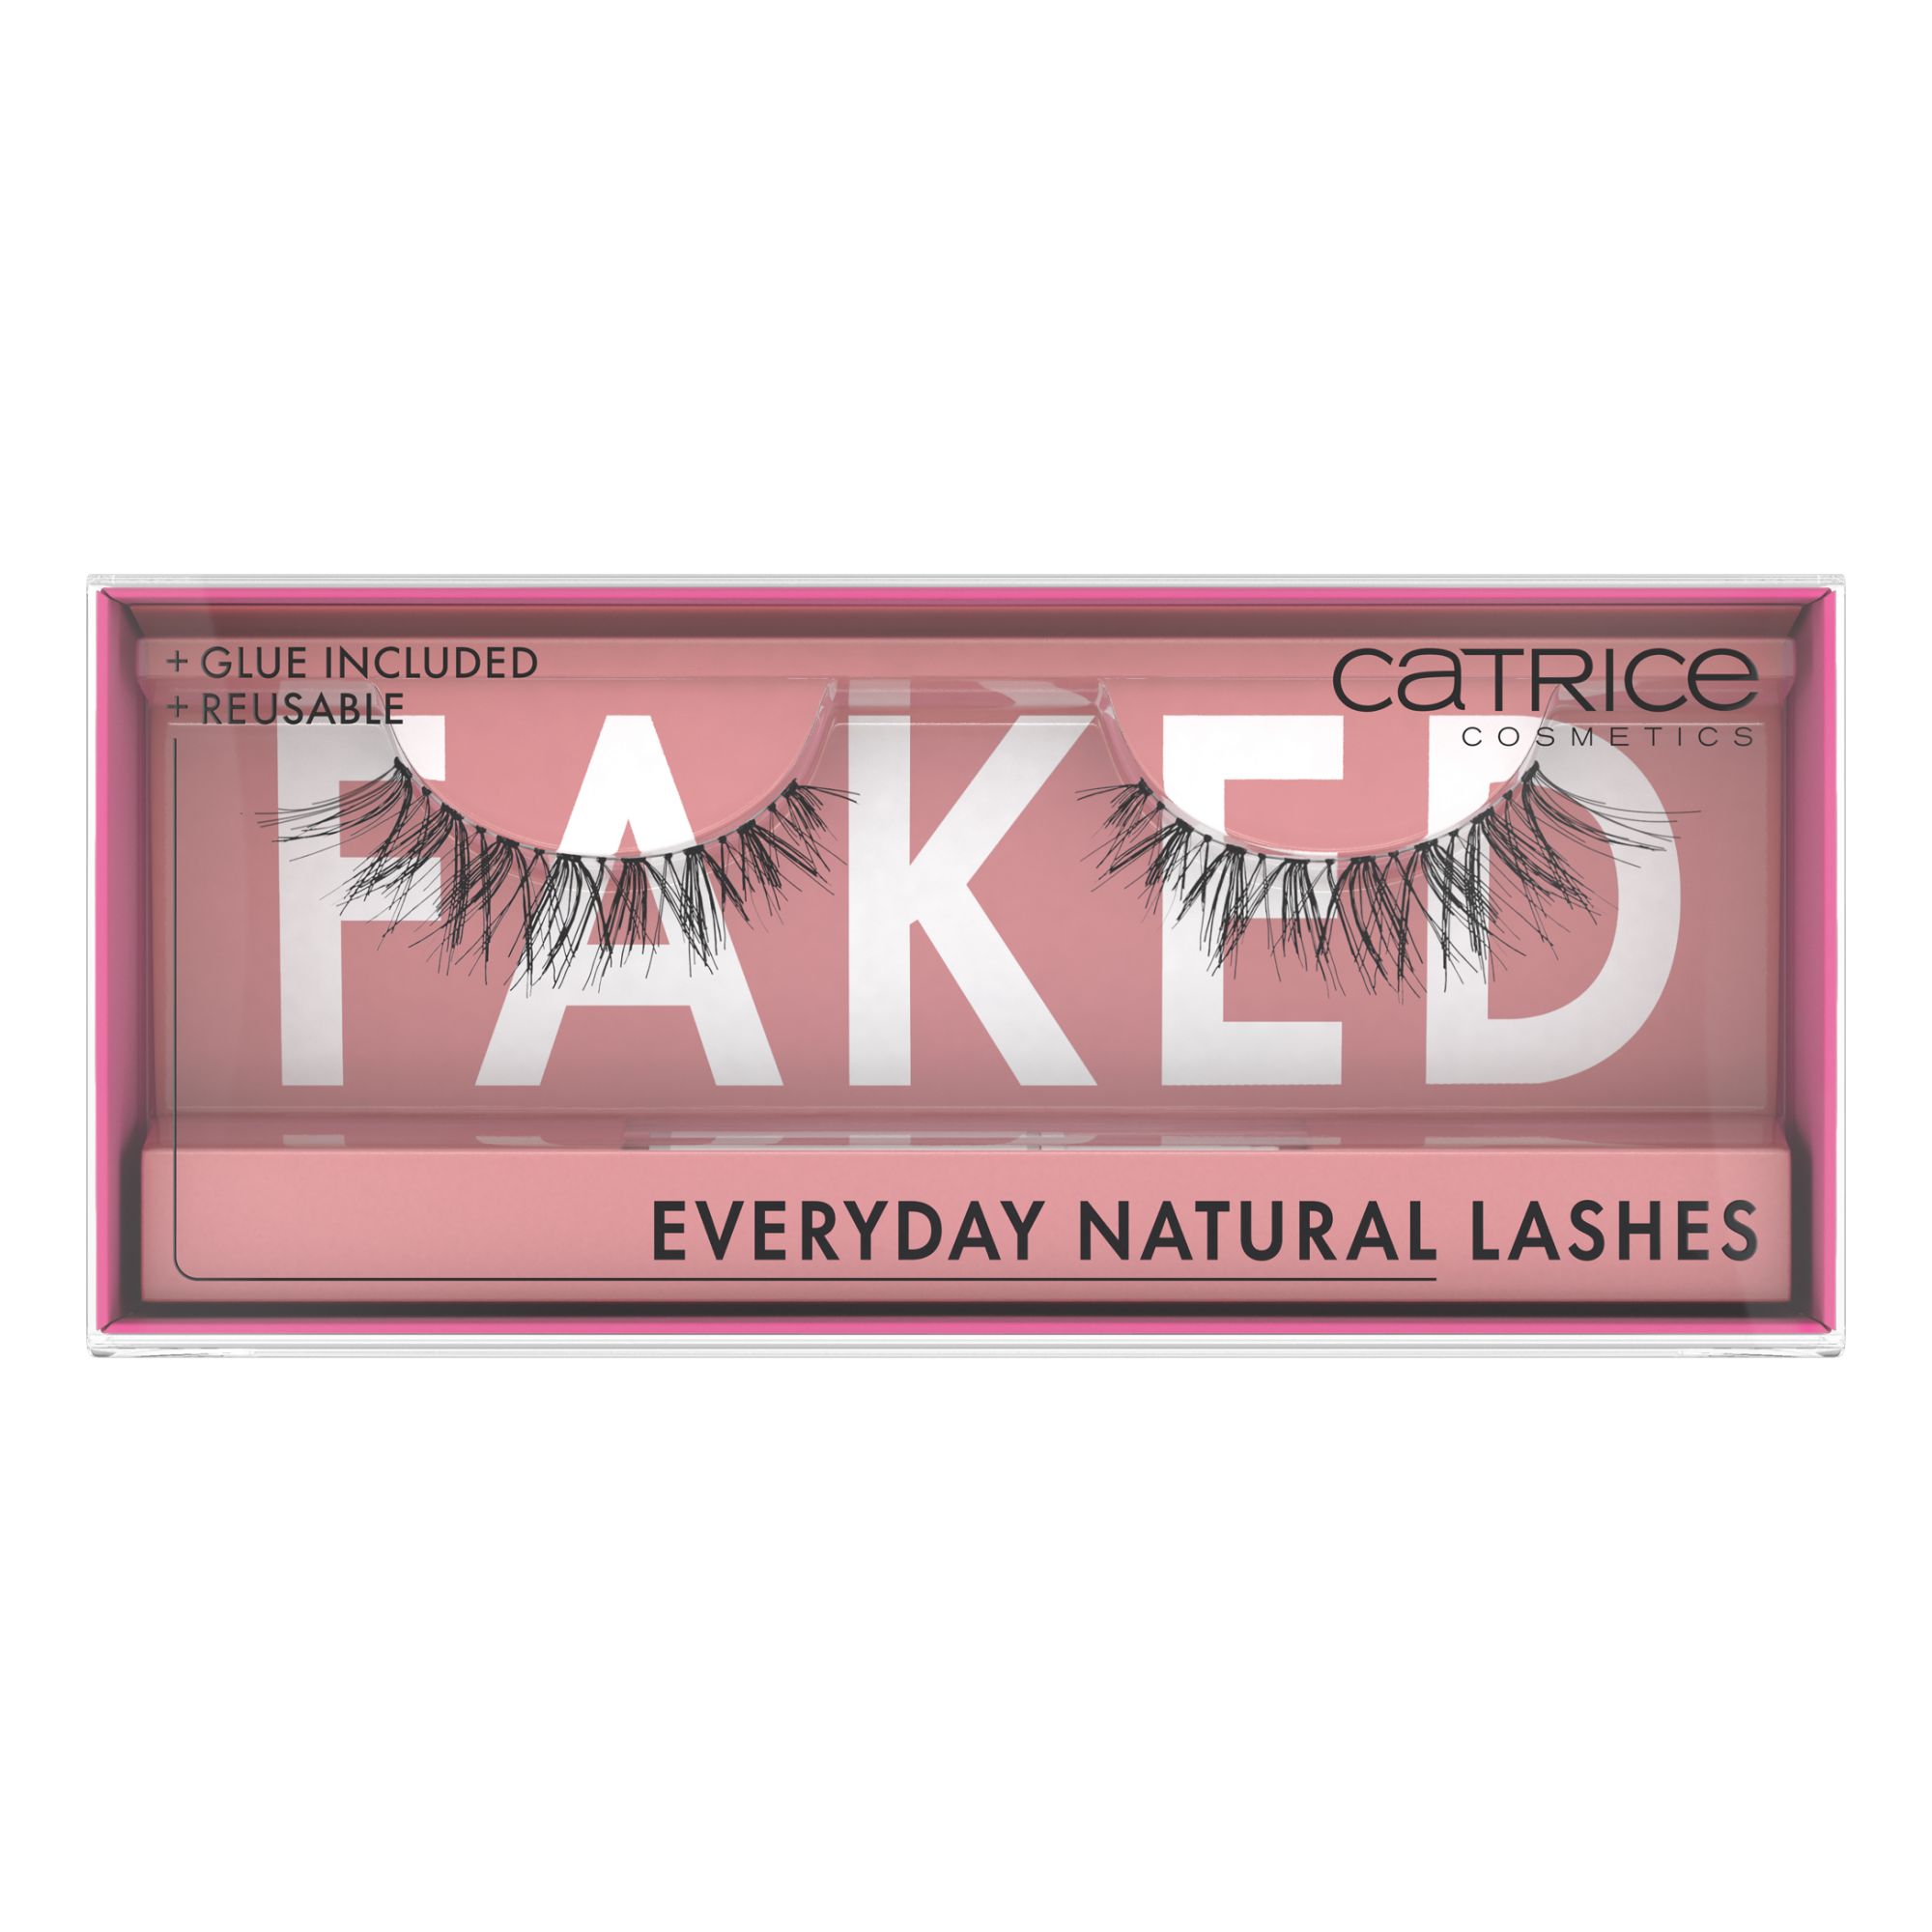 Faked Everyday Natural Lashes